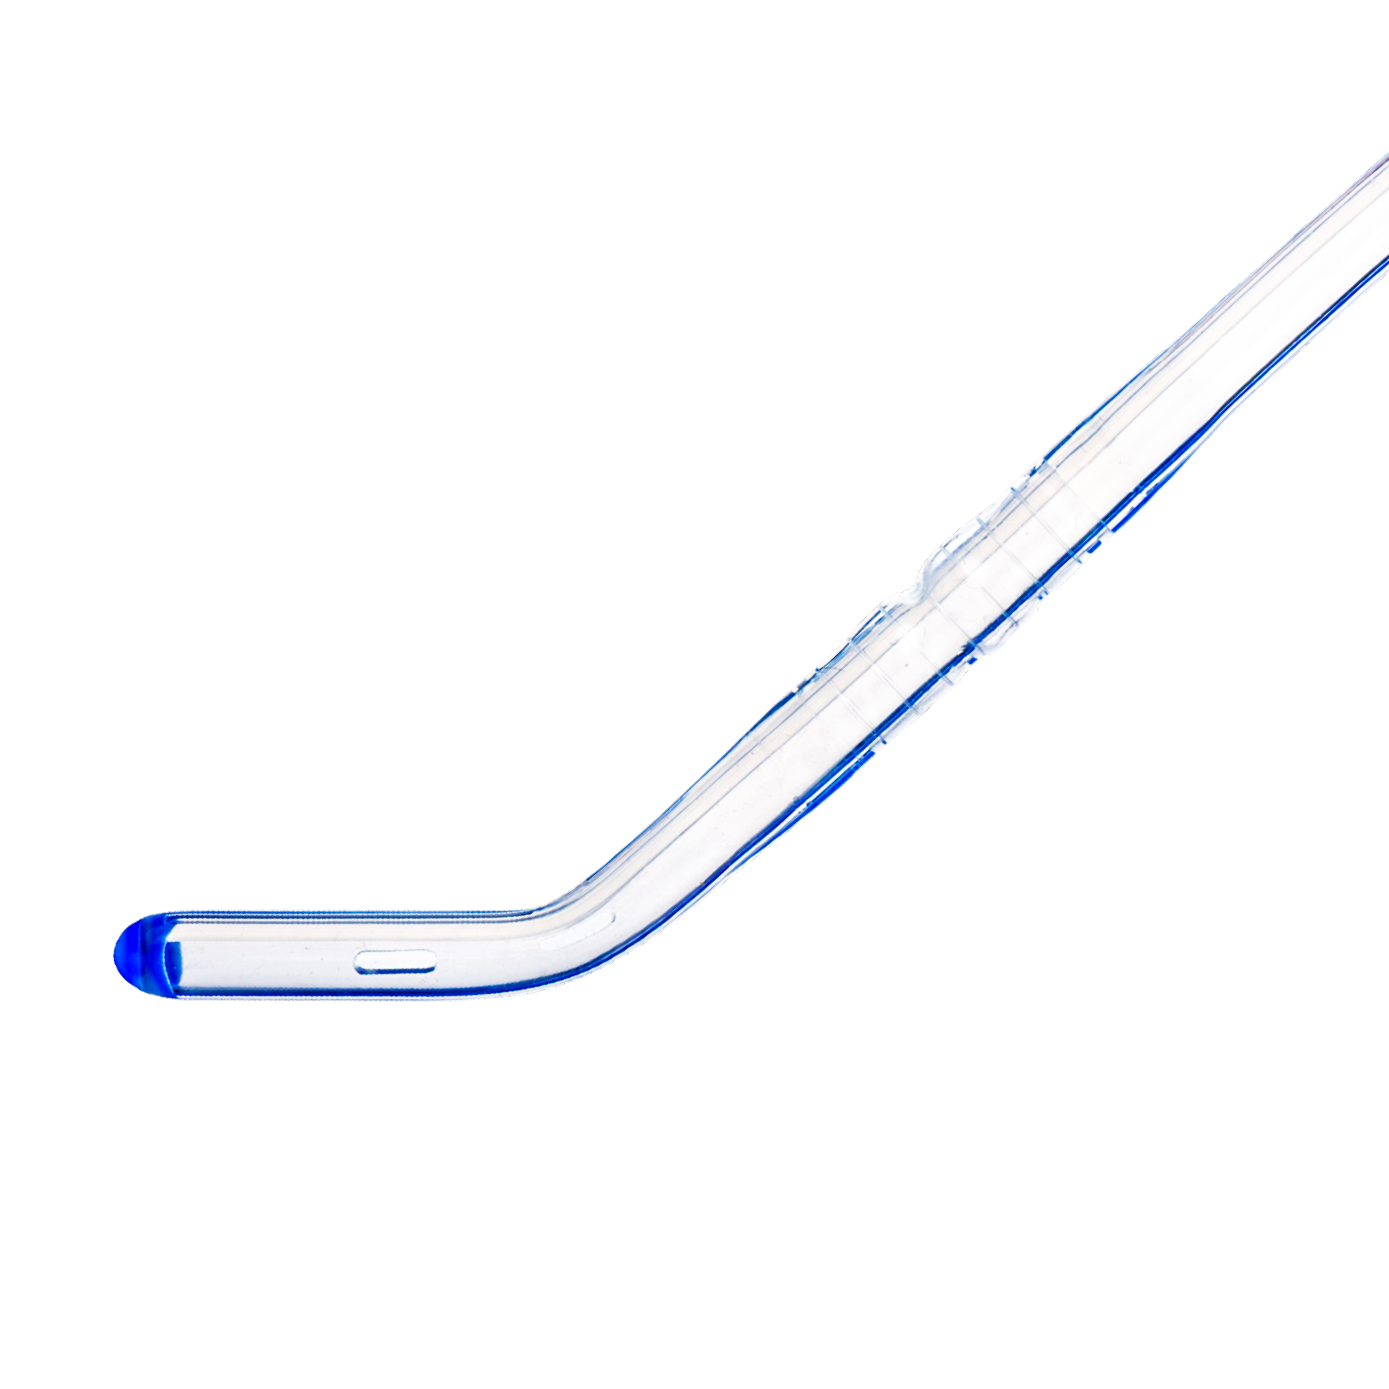 All Silicone Foley Catheter with Mercier Tip